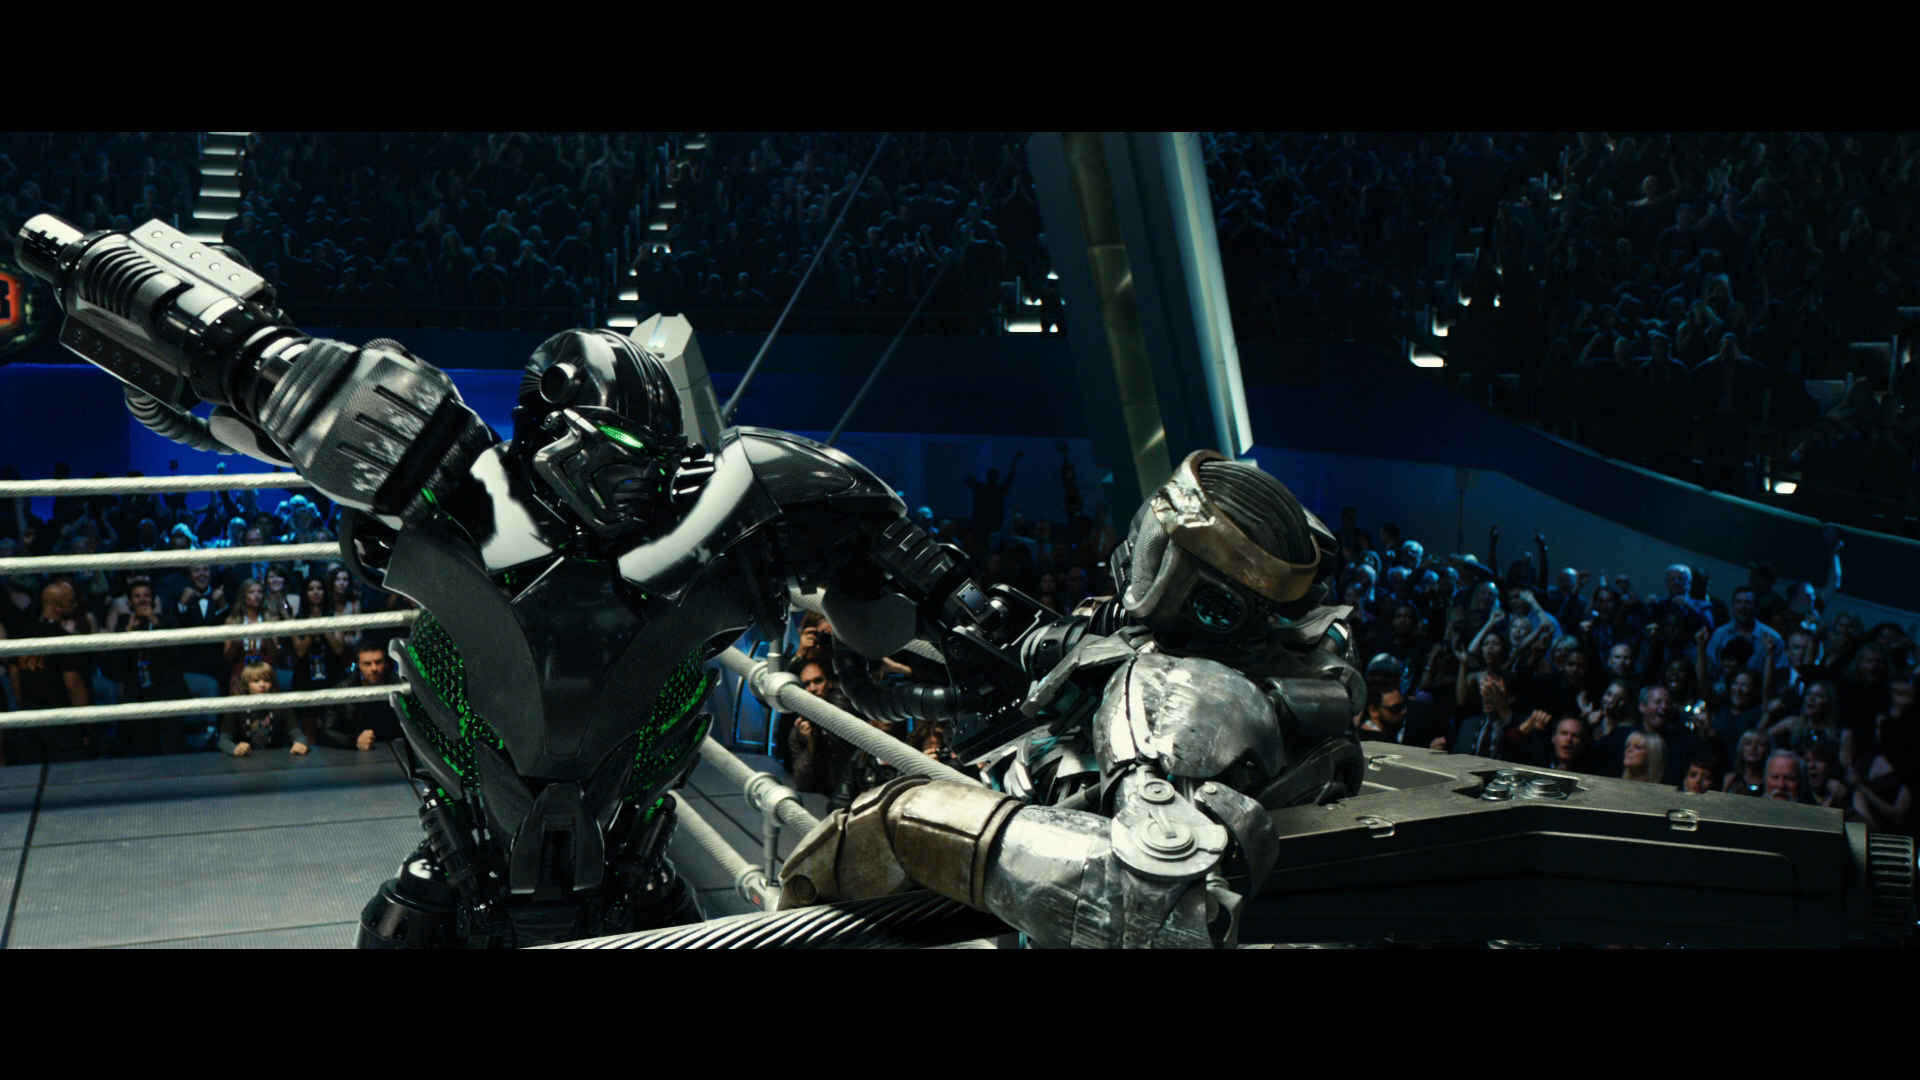 Index of /reviews/images/reviews/1/realsteel